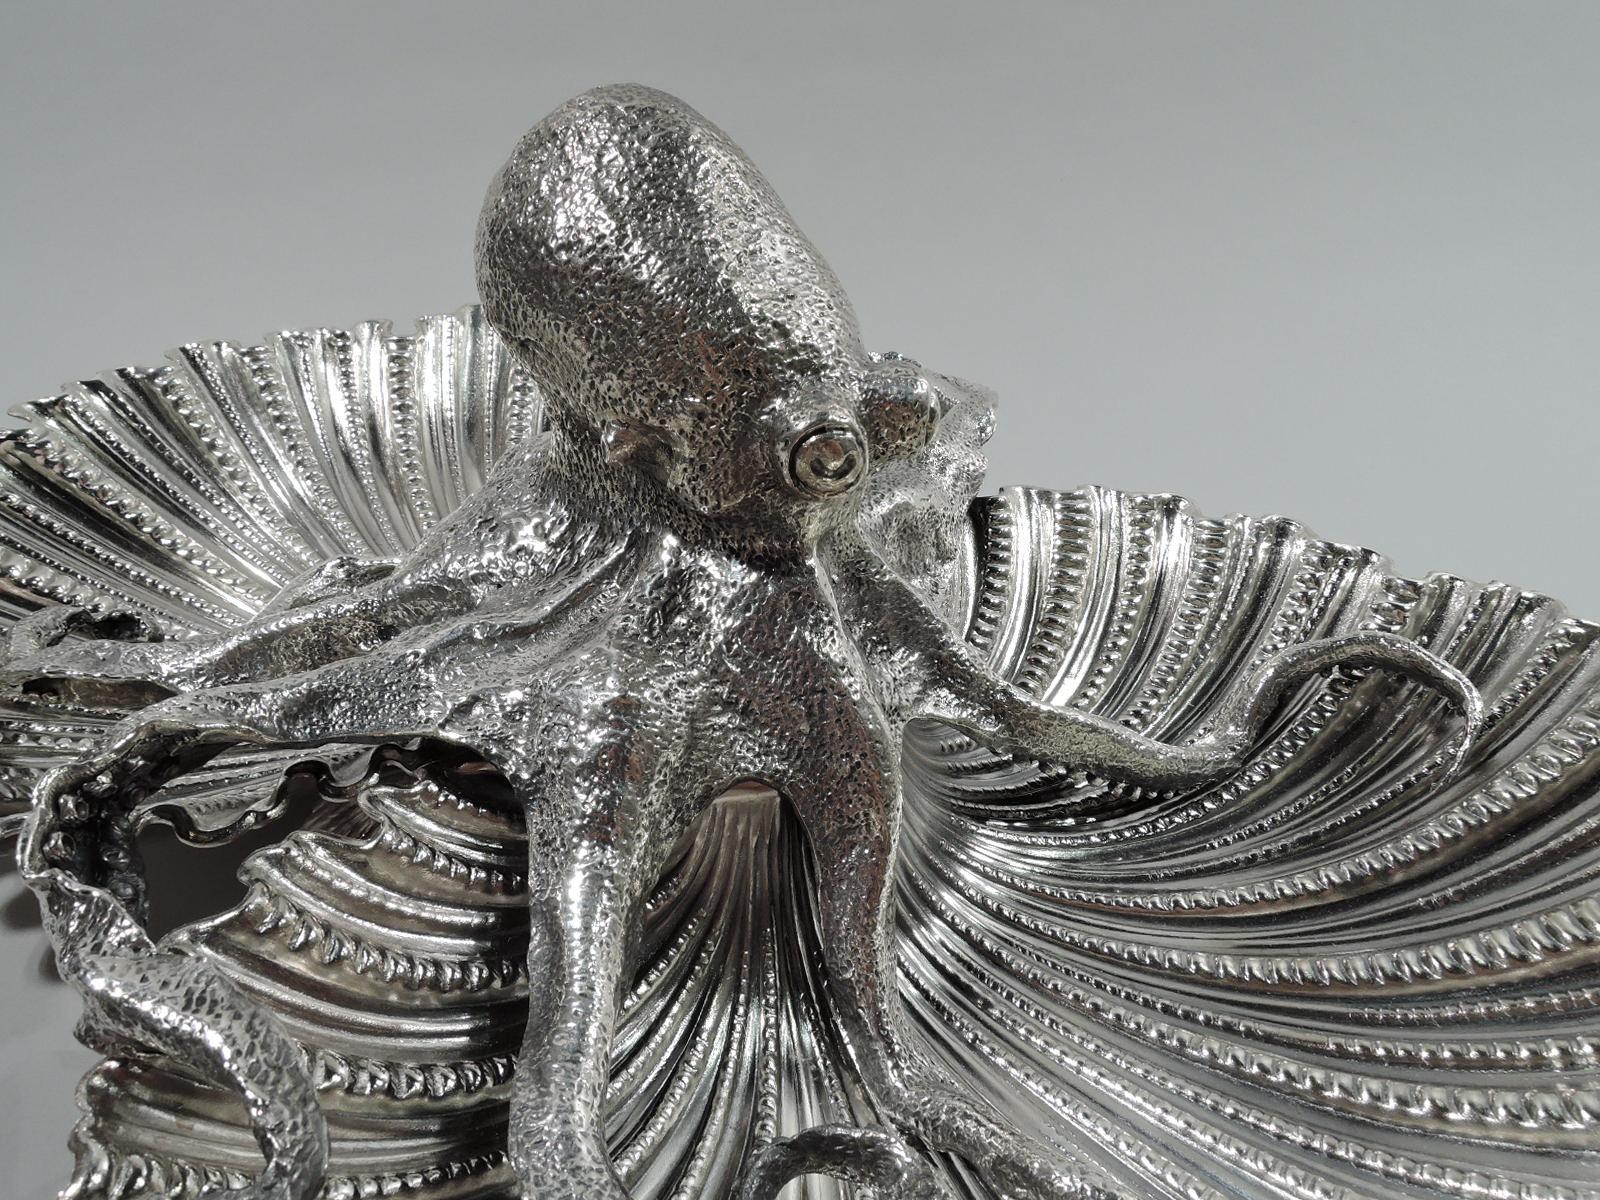 Pair of dramatic sterling silver seafood serving bowls. Made by Buccellati in Italy. Each: Two joined scallop-shells bowls on scallop-shell supports. A traditional form enlivened by the figure of an octopus squatting in the center, its curled and